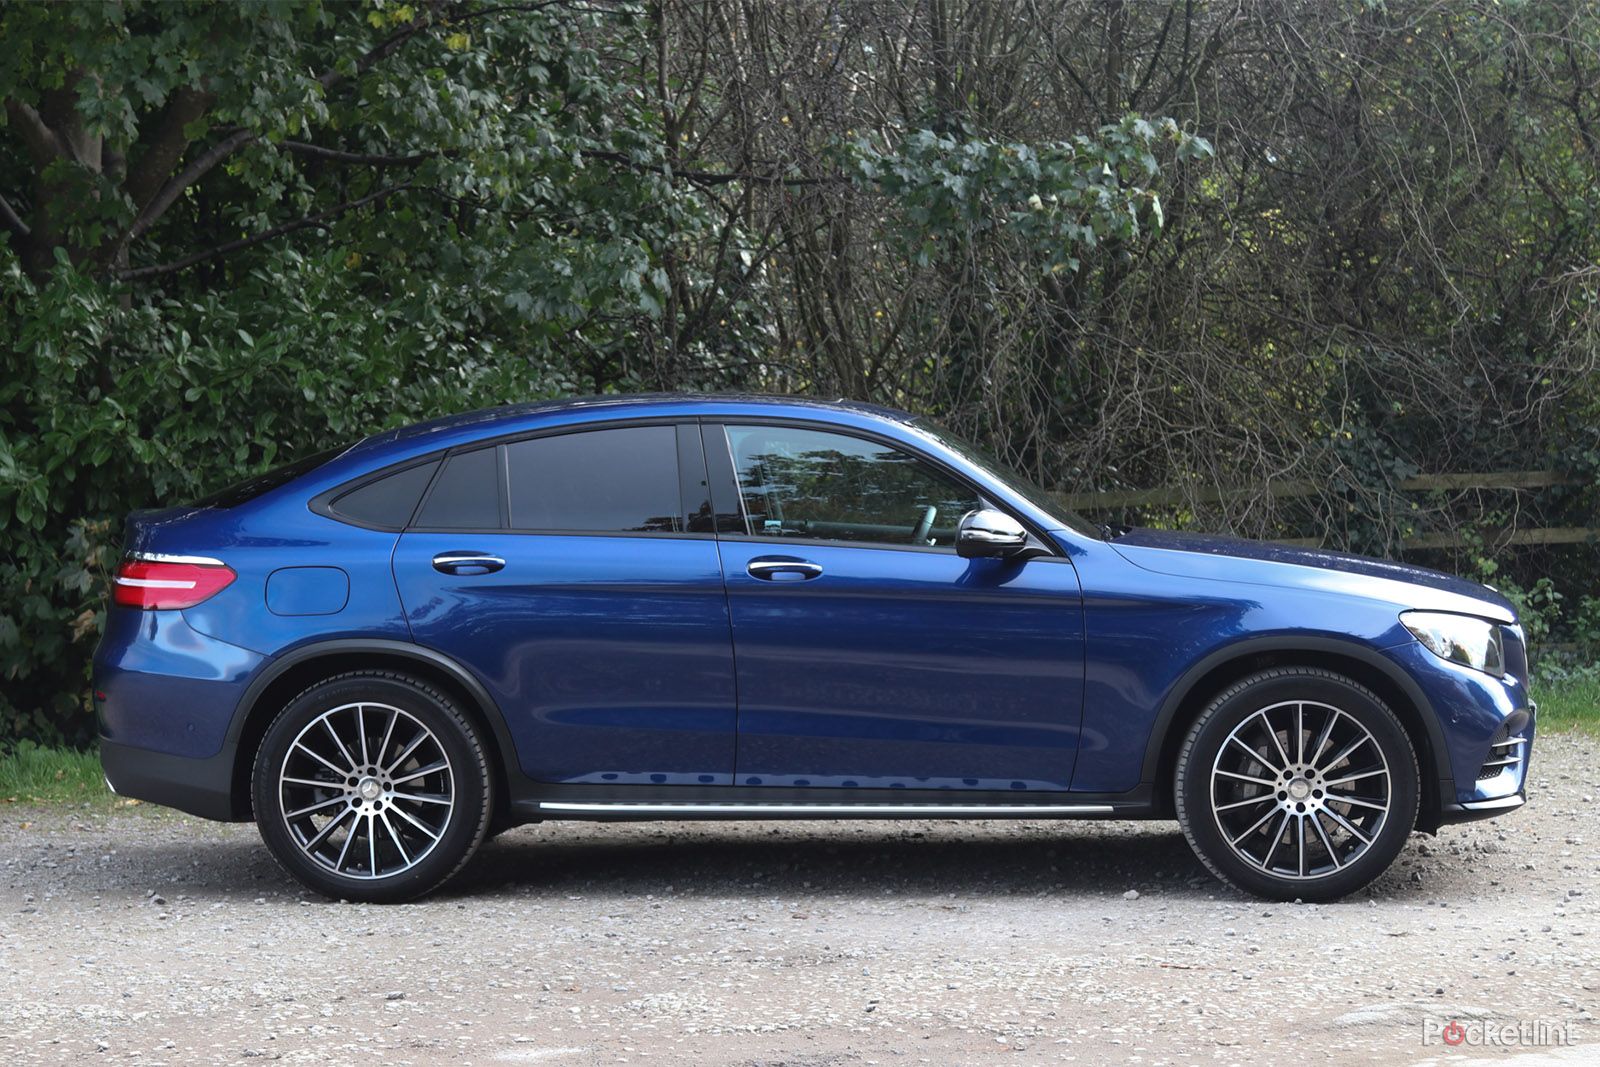 Mercedes-Benz GLC Coupe review image 6